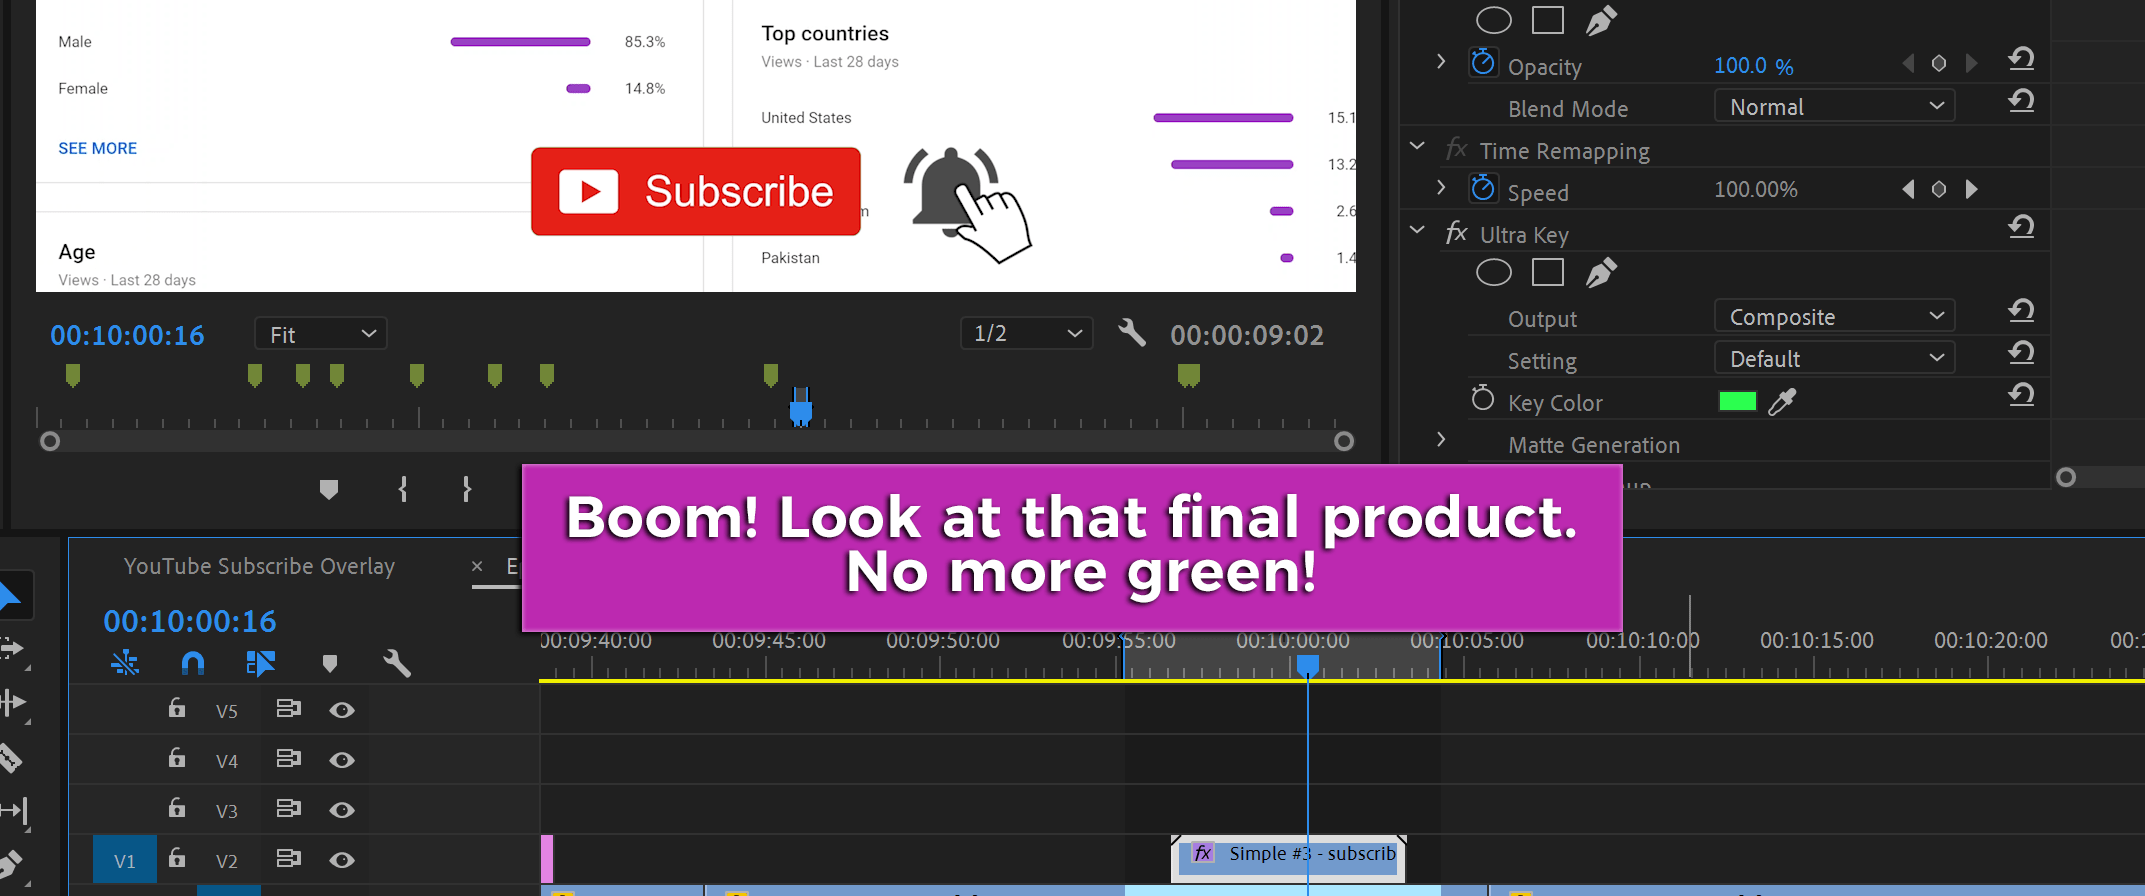 Enjoy the fruits of your labor! Successful green screen effect using the "ultra key" in Adobe Premiere Pro